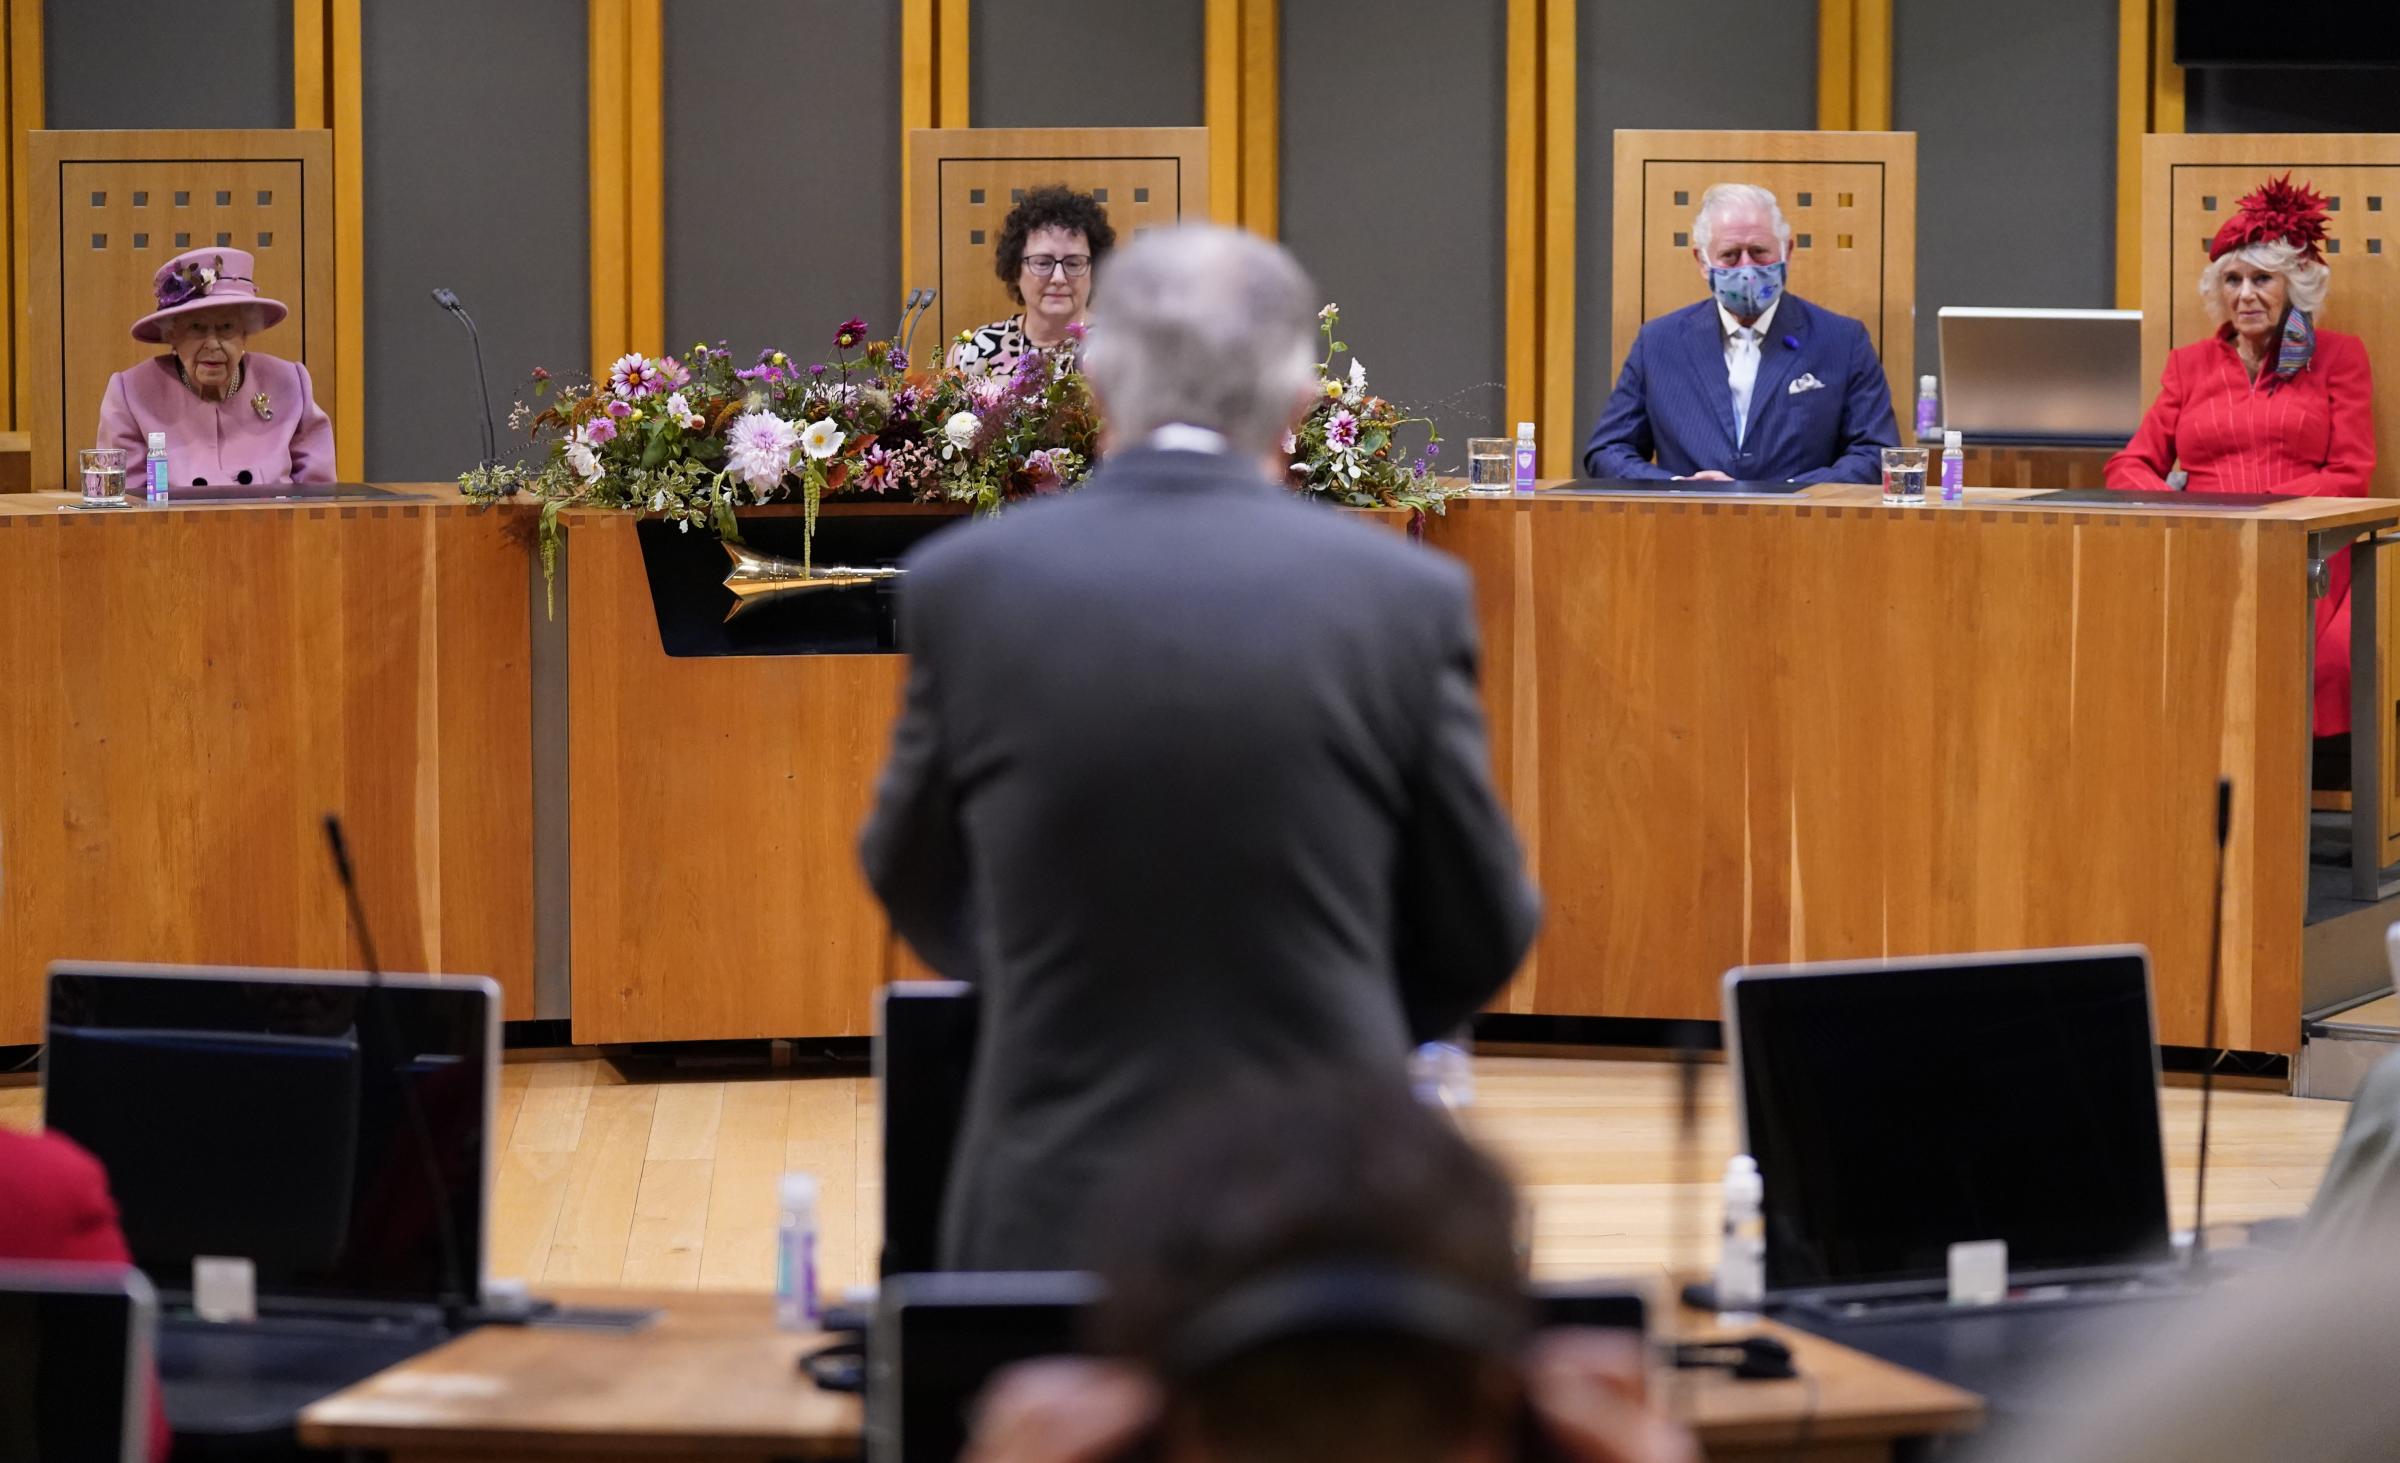 Queen Elizabeth II (left), Llywydd (presiding officer) Elin Jones, the Prince of Wales and Duchess of Cornwall (right) listen to a response by First Minister Mark Drakeford (back to camera) inside the Siambr (Chamber) during the ceremonial opening of the